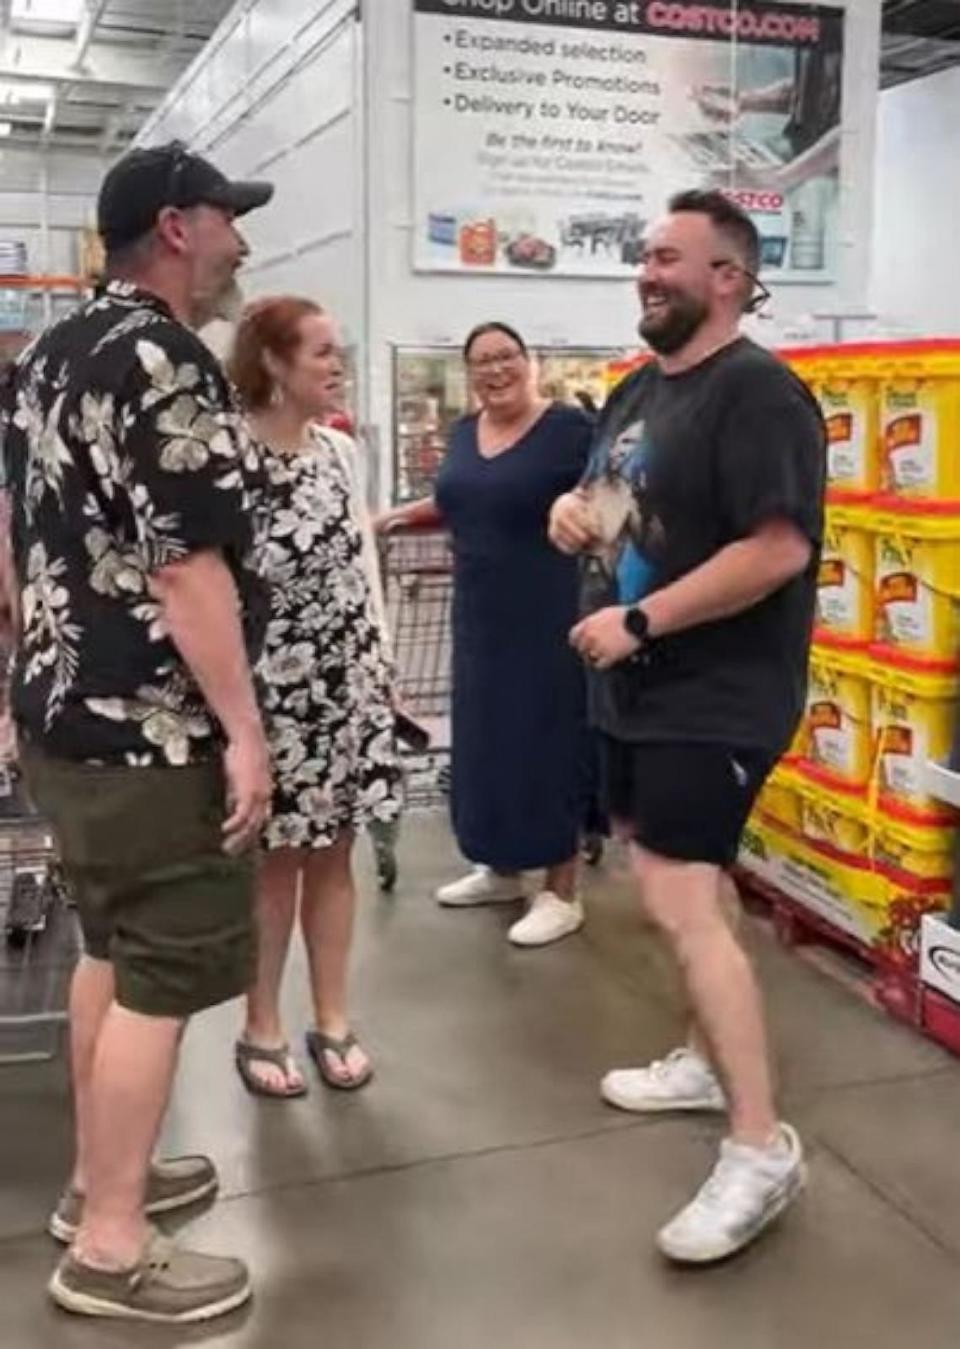 PHOTO: Clint Blevins of Chattanooga, Tennessee, was surprised with a 27th birthday party at a local Costco store. (Emma Blevins via Storyful)